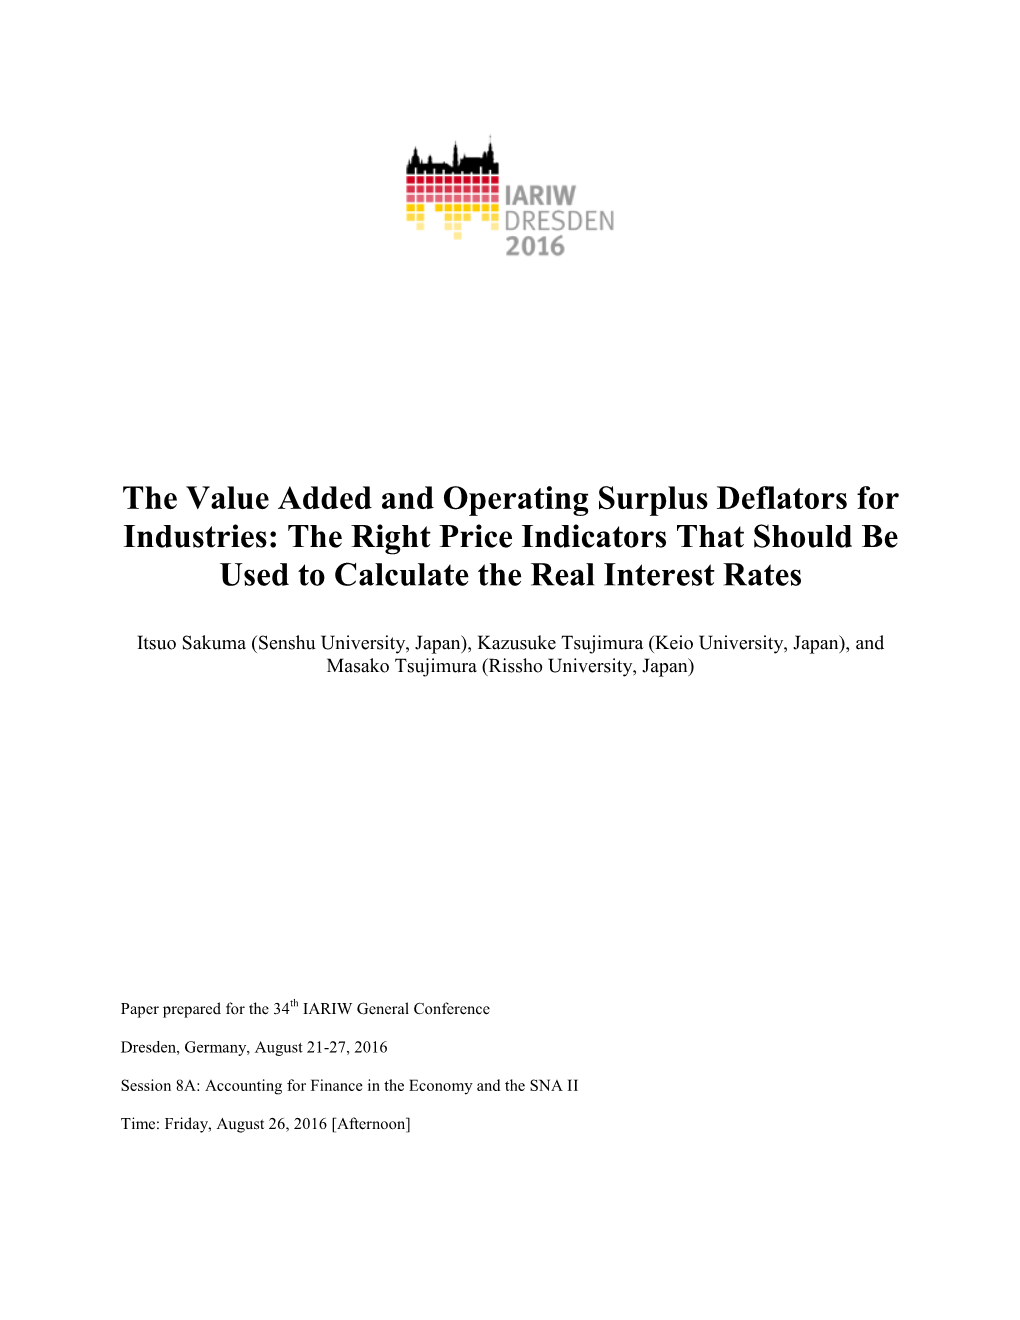 The Value Added and Operating Surplus Deflators for Industries: the Right Price Indicators That Should Be Used to Calculate the Real Interest Rates